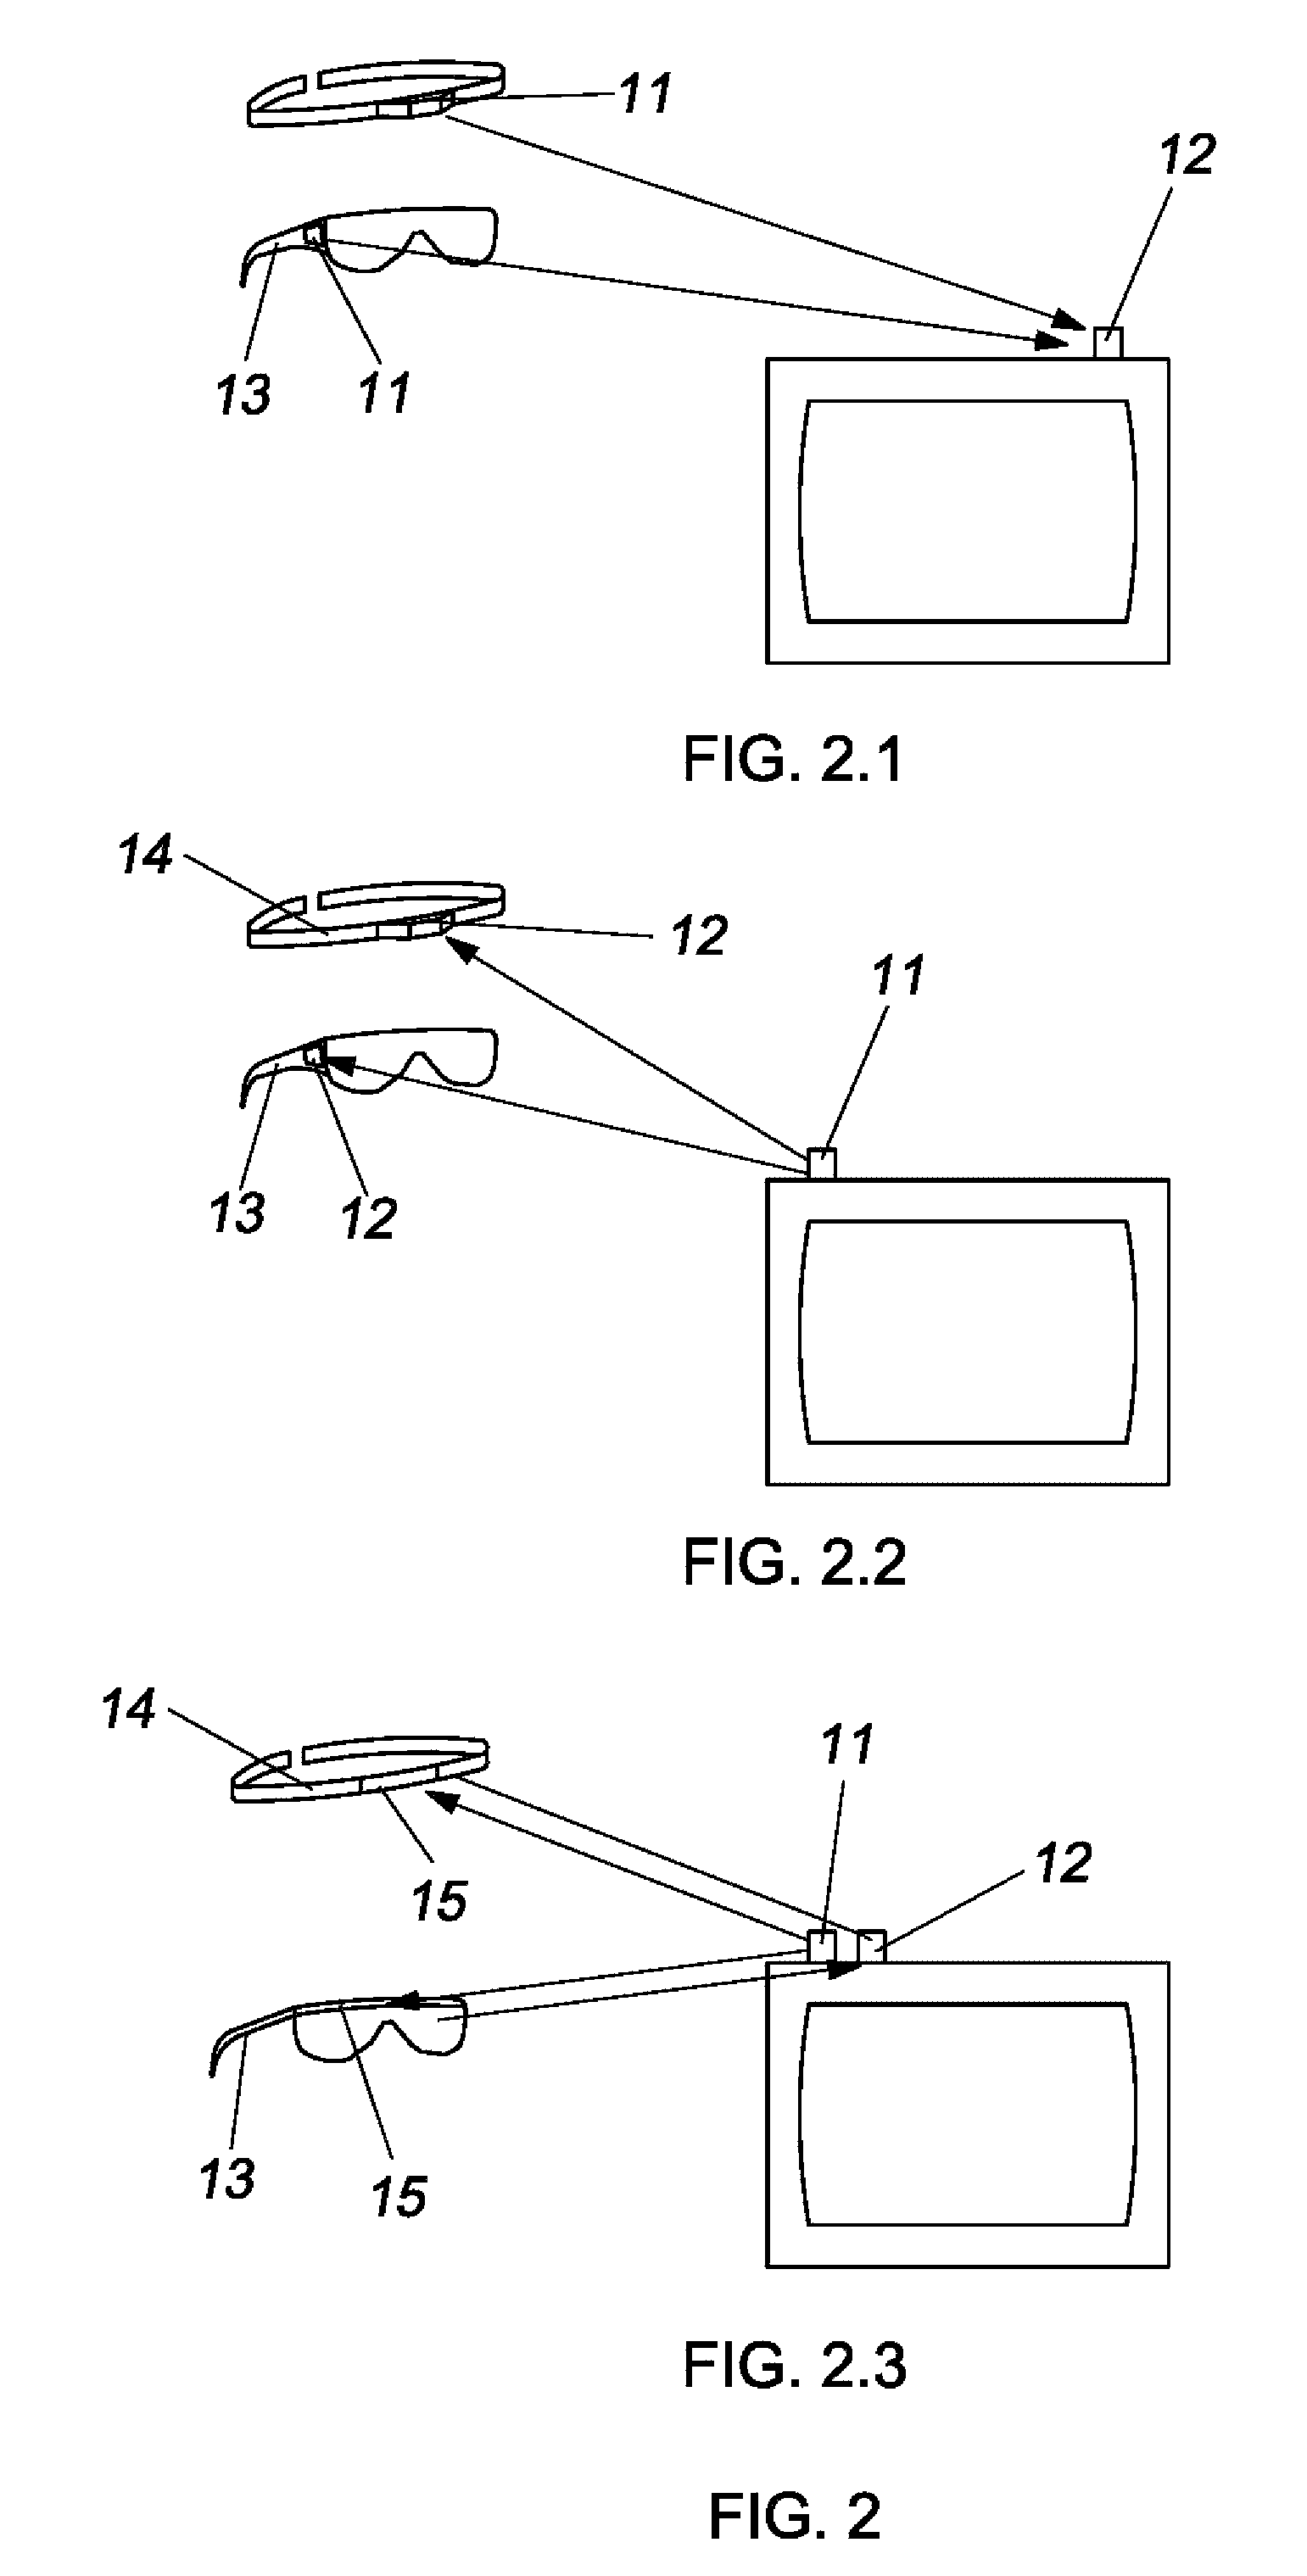 Automatic control of a medical device